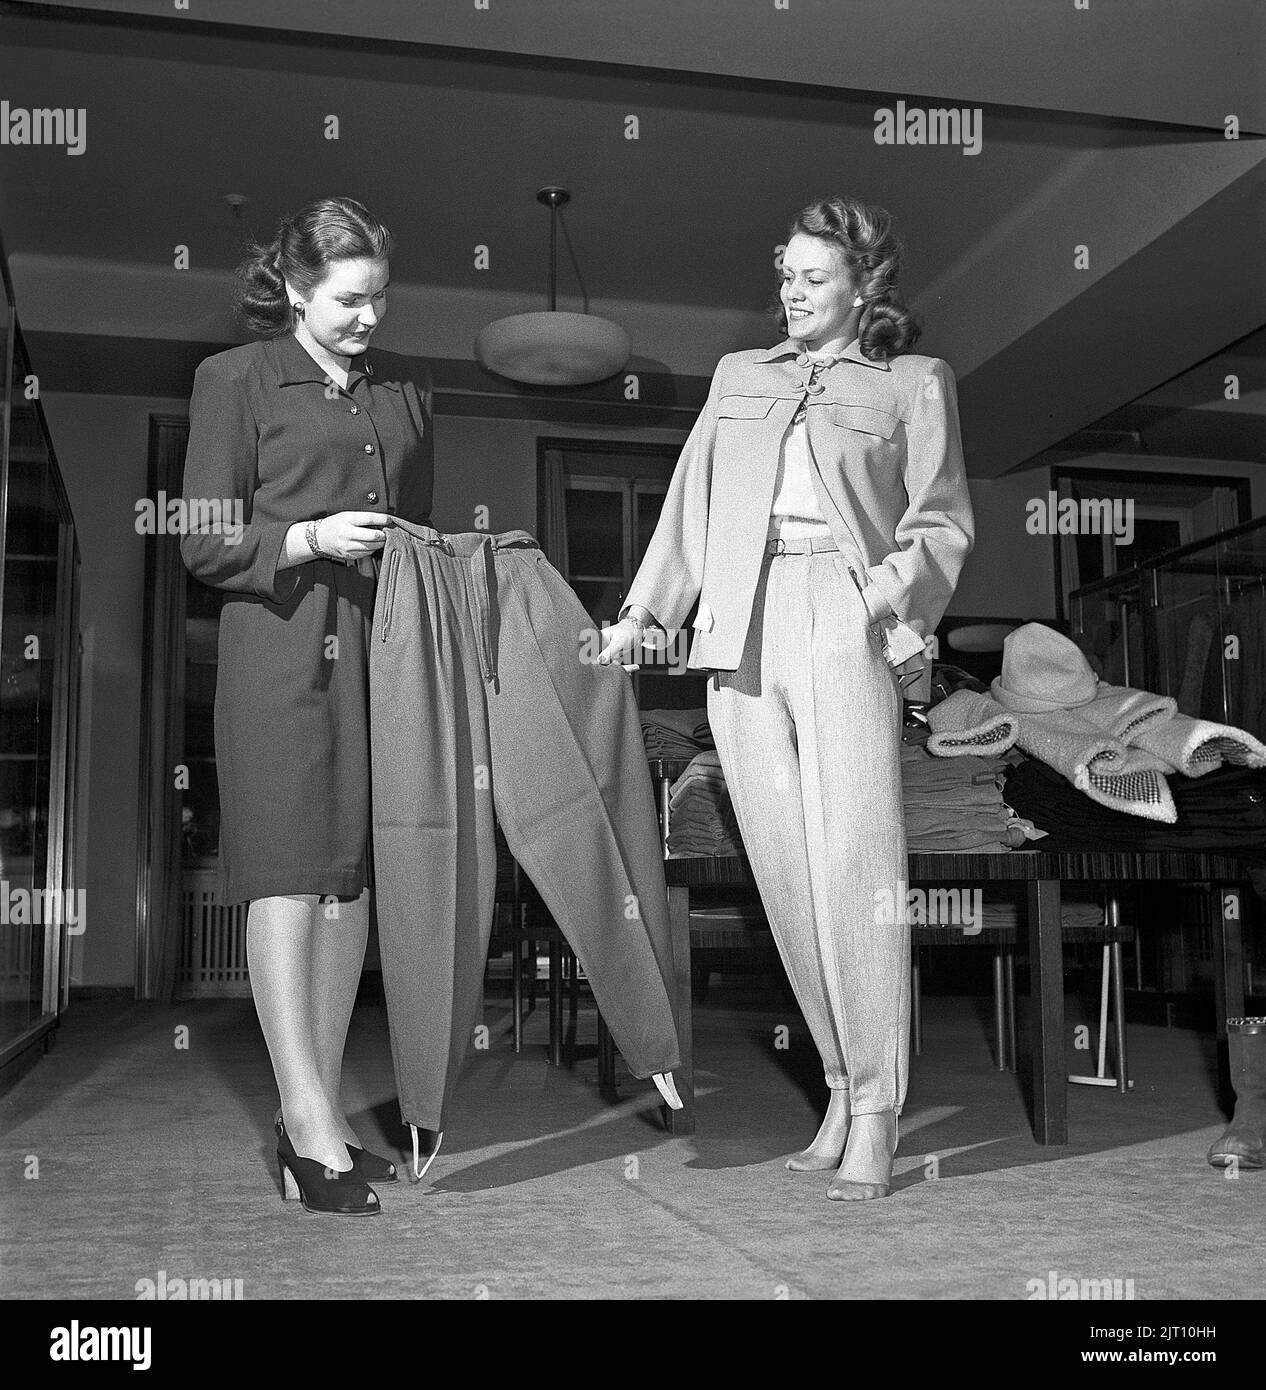 1945 Macy's Department Store Ad - how I could wear it without my Girdle  Showing